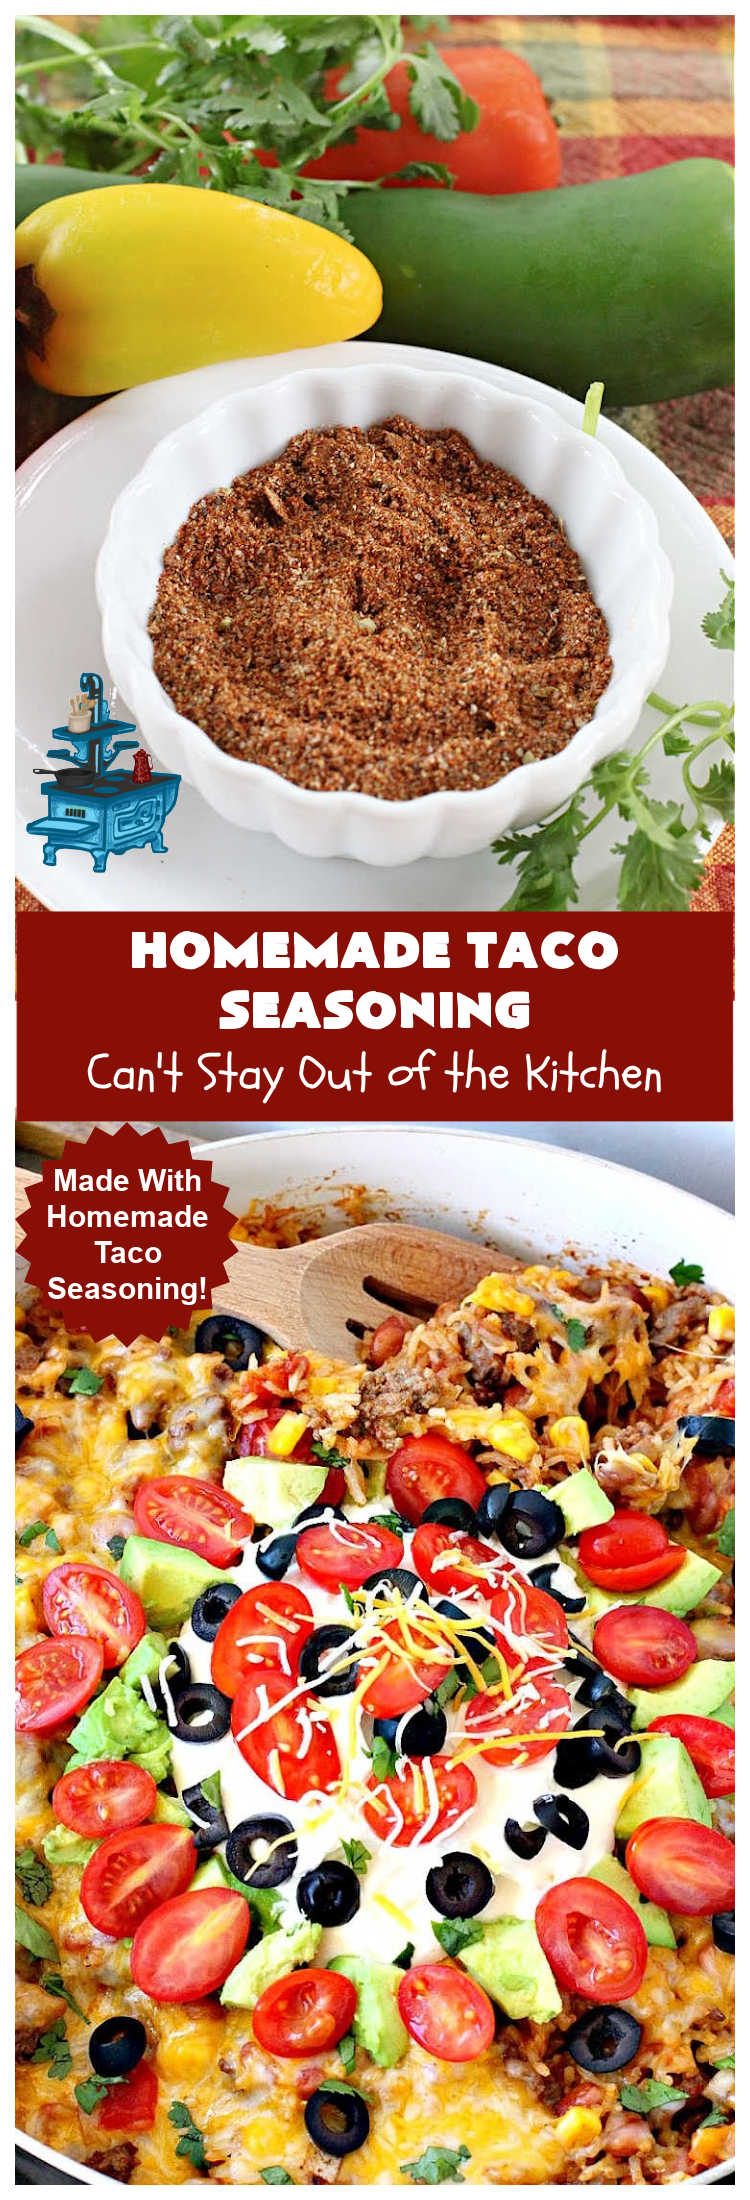 Homemade Taco Seasoning | Can't Stay Out of the Kitchen | this is such an easy way to whip up #HomemadeTacoSeasoning for any #TexMex #recipe including #salads, #skillets, #AppetizerDips or any #Mexican entree. You can make it in two minutes & it replaces a store-bought #TacoSeasoningPacket one-for-one. No MSG, sugar or fillers. #GlutenFree #vegan